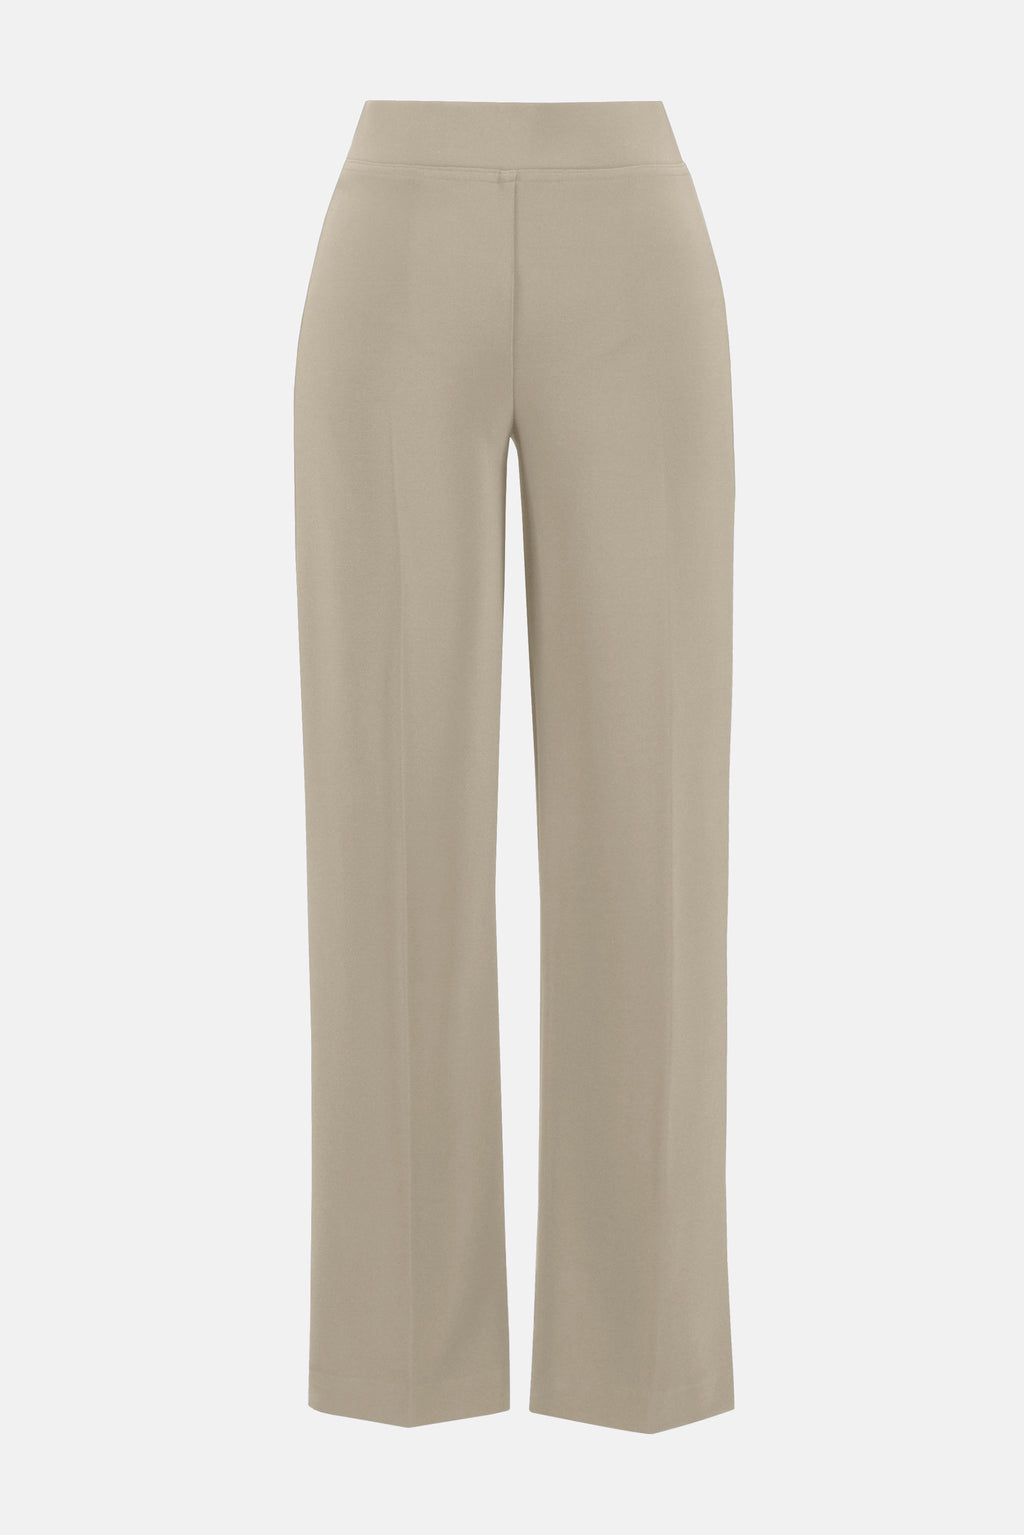 Create the illusion of longer legs with a slightly higher waistline in these wide-leg pants. The 32-inch inseam creates a lengthening effect especially when paired with a tucked-in blouse and fashionable heels. The silky knit fabric and elasticized waistband offer class with unparalleled comfort.